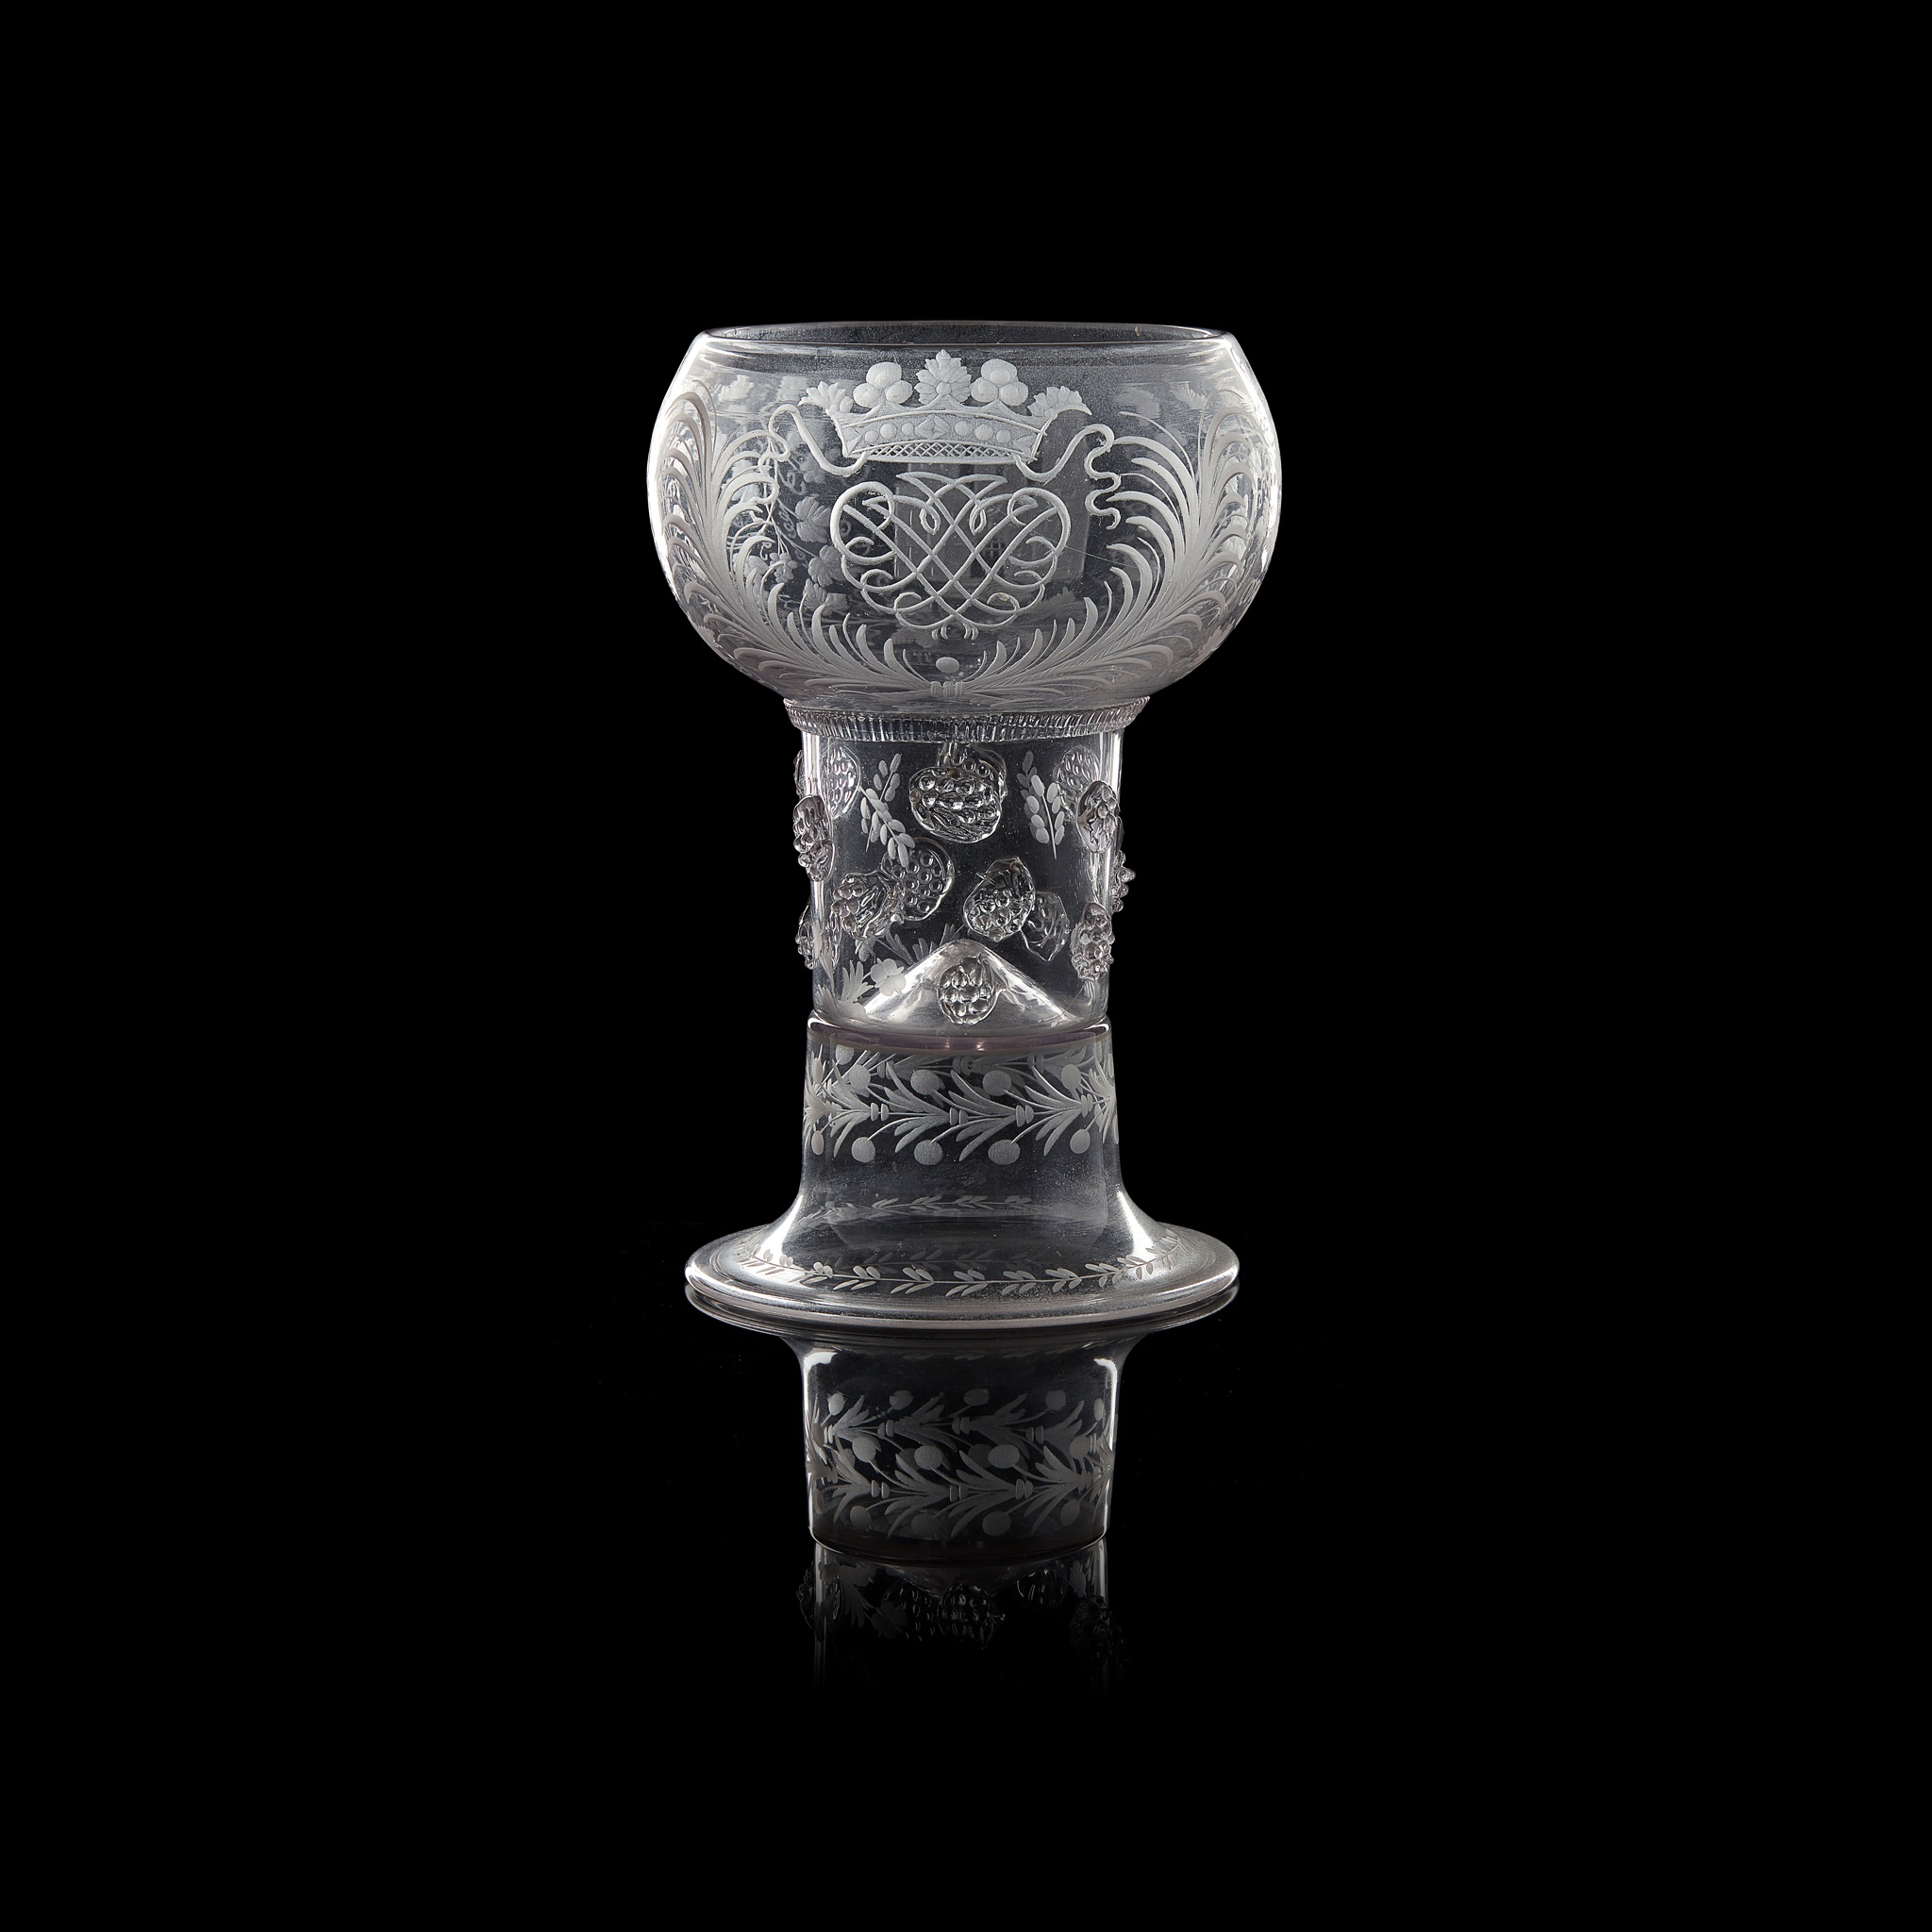 LARGE CLEAR GLASS ROEMER BEARING THE BREADALBANE CYPHER DUTCH OR GERMAN, LATE 17TH / EARLY 18TH - Image 2 of 4